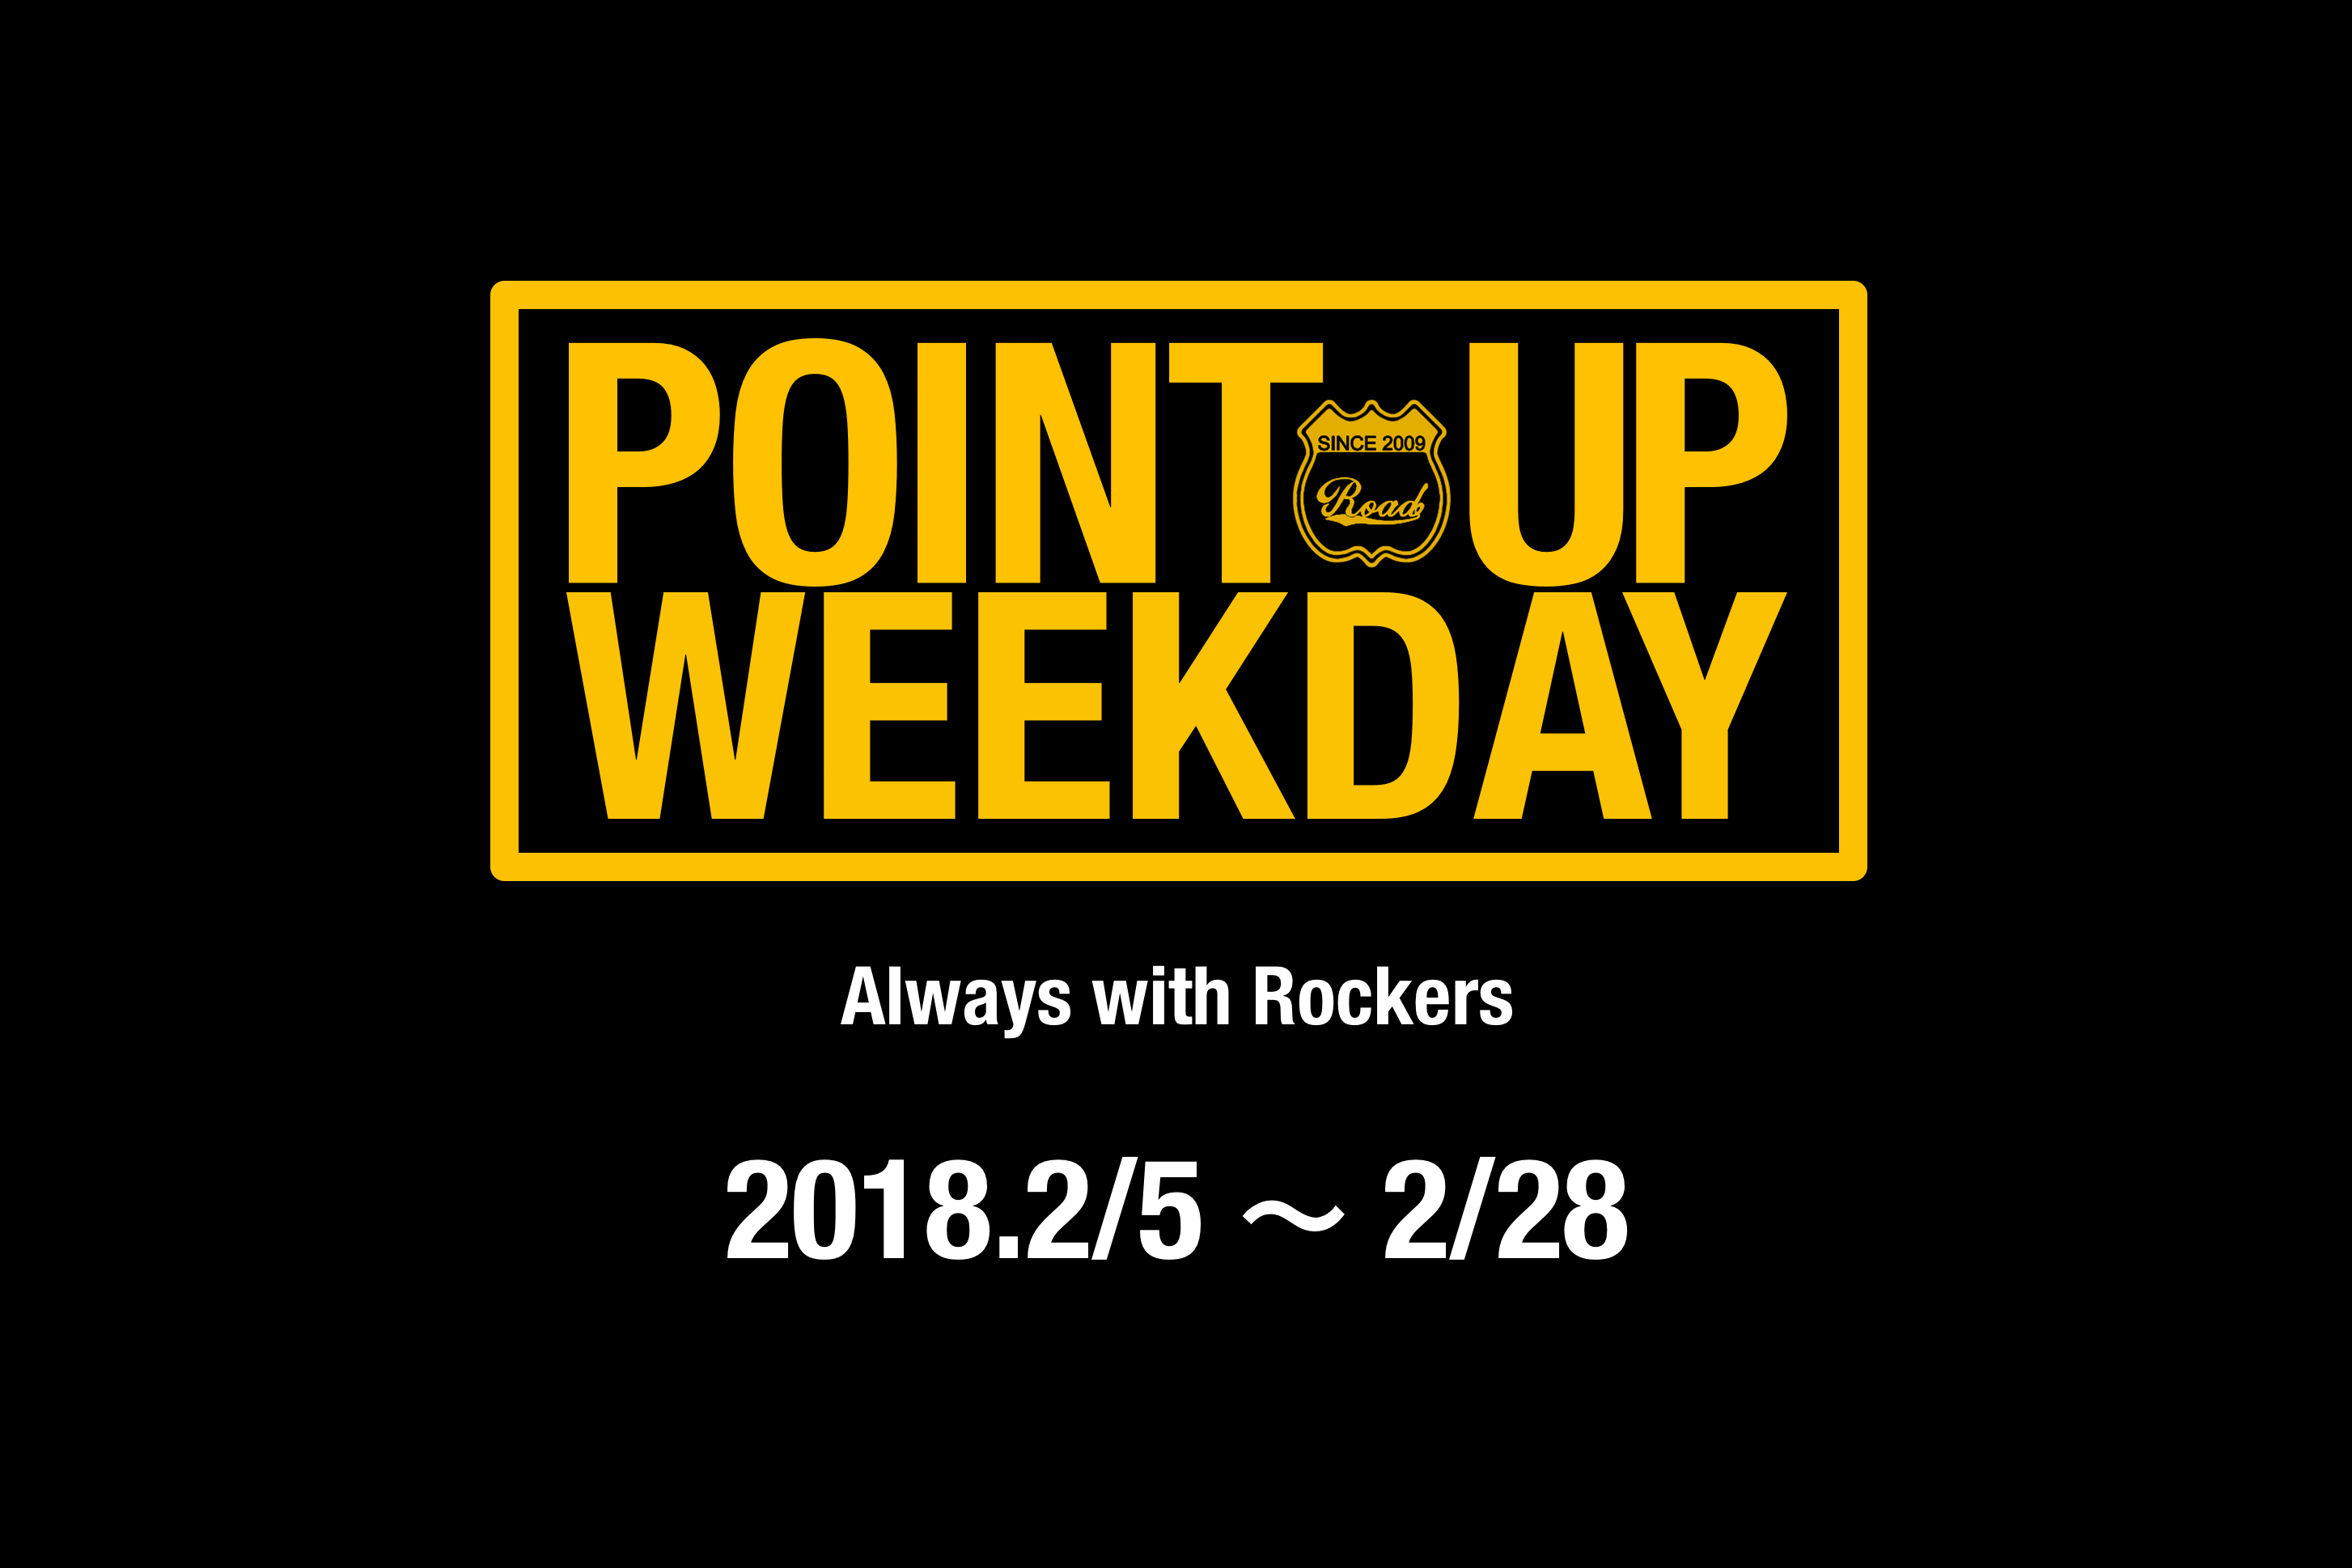 POINT UP WEEKDAY